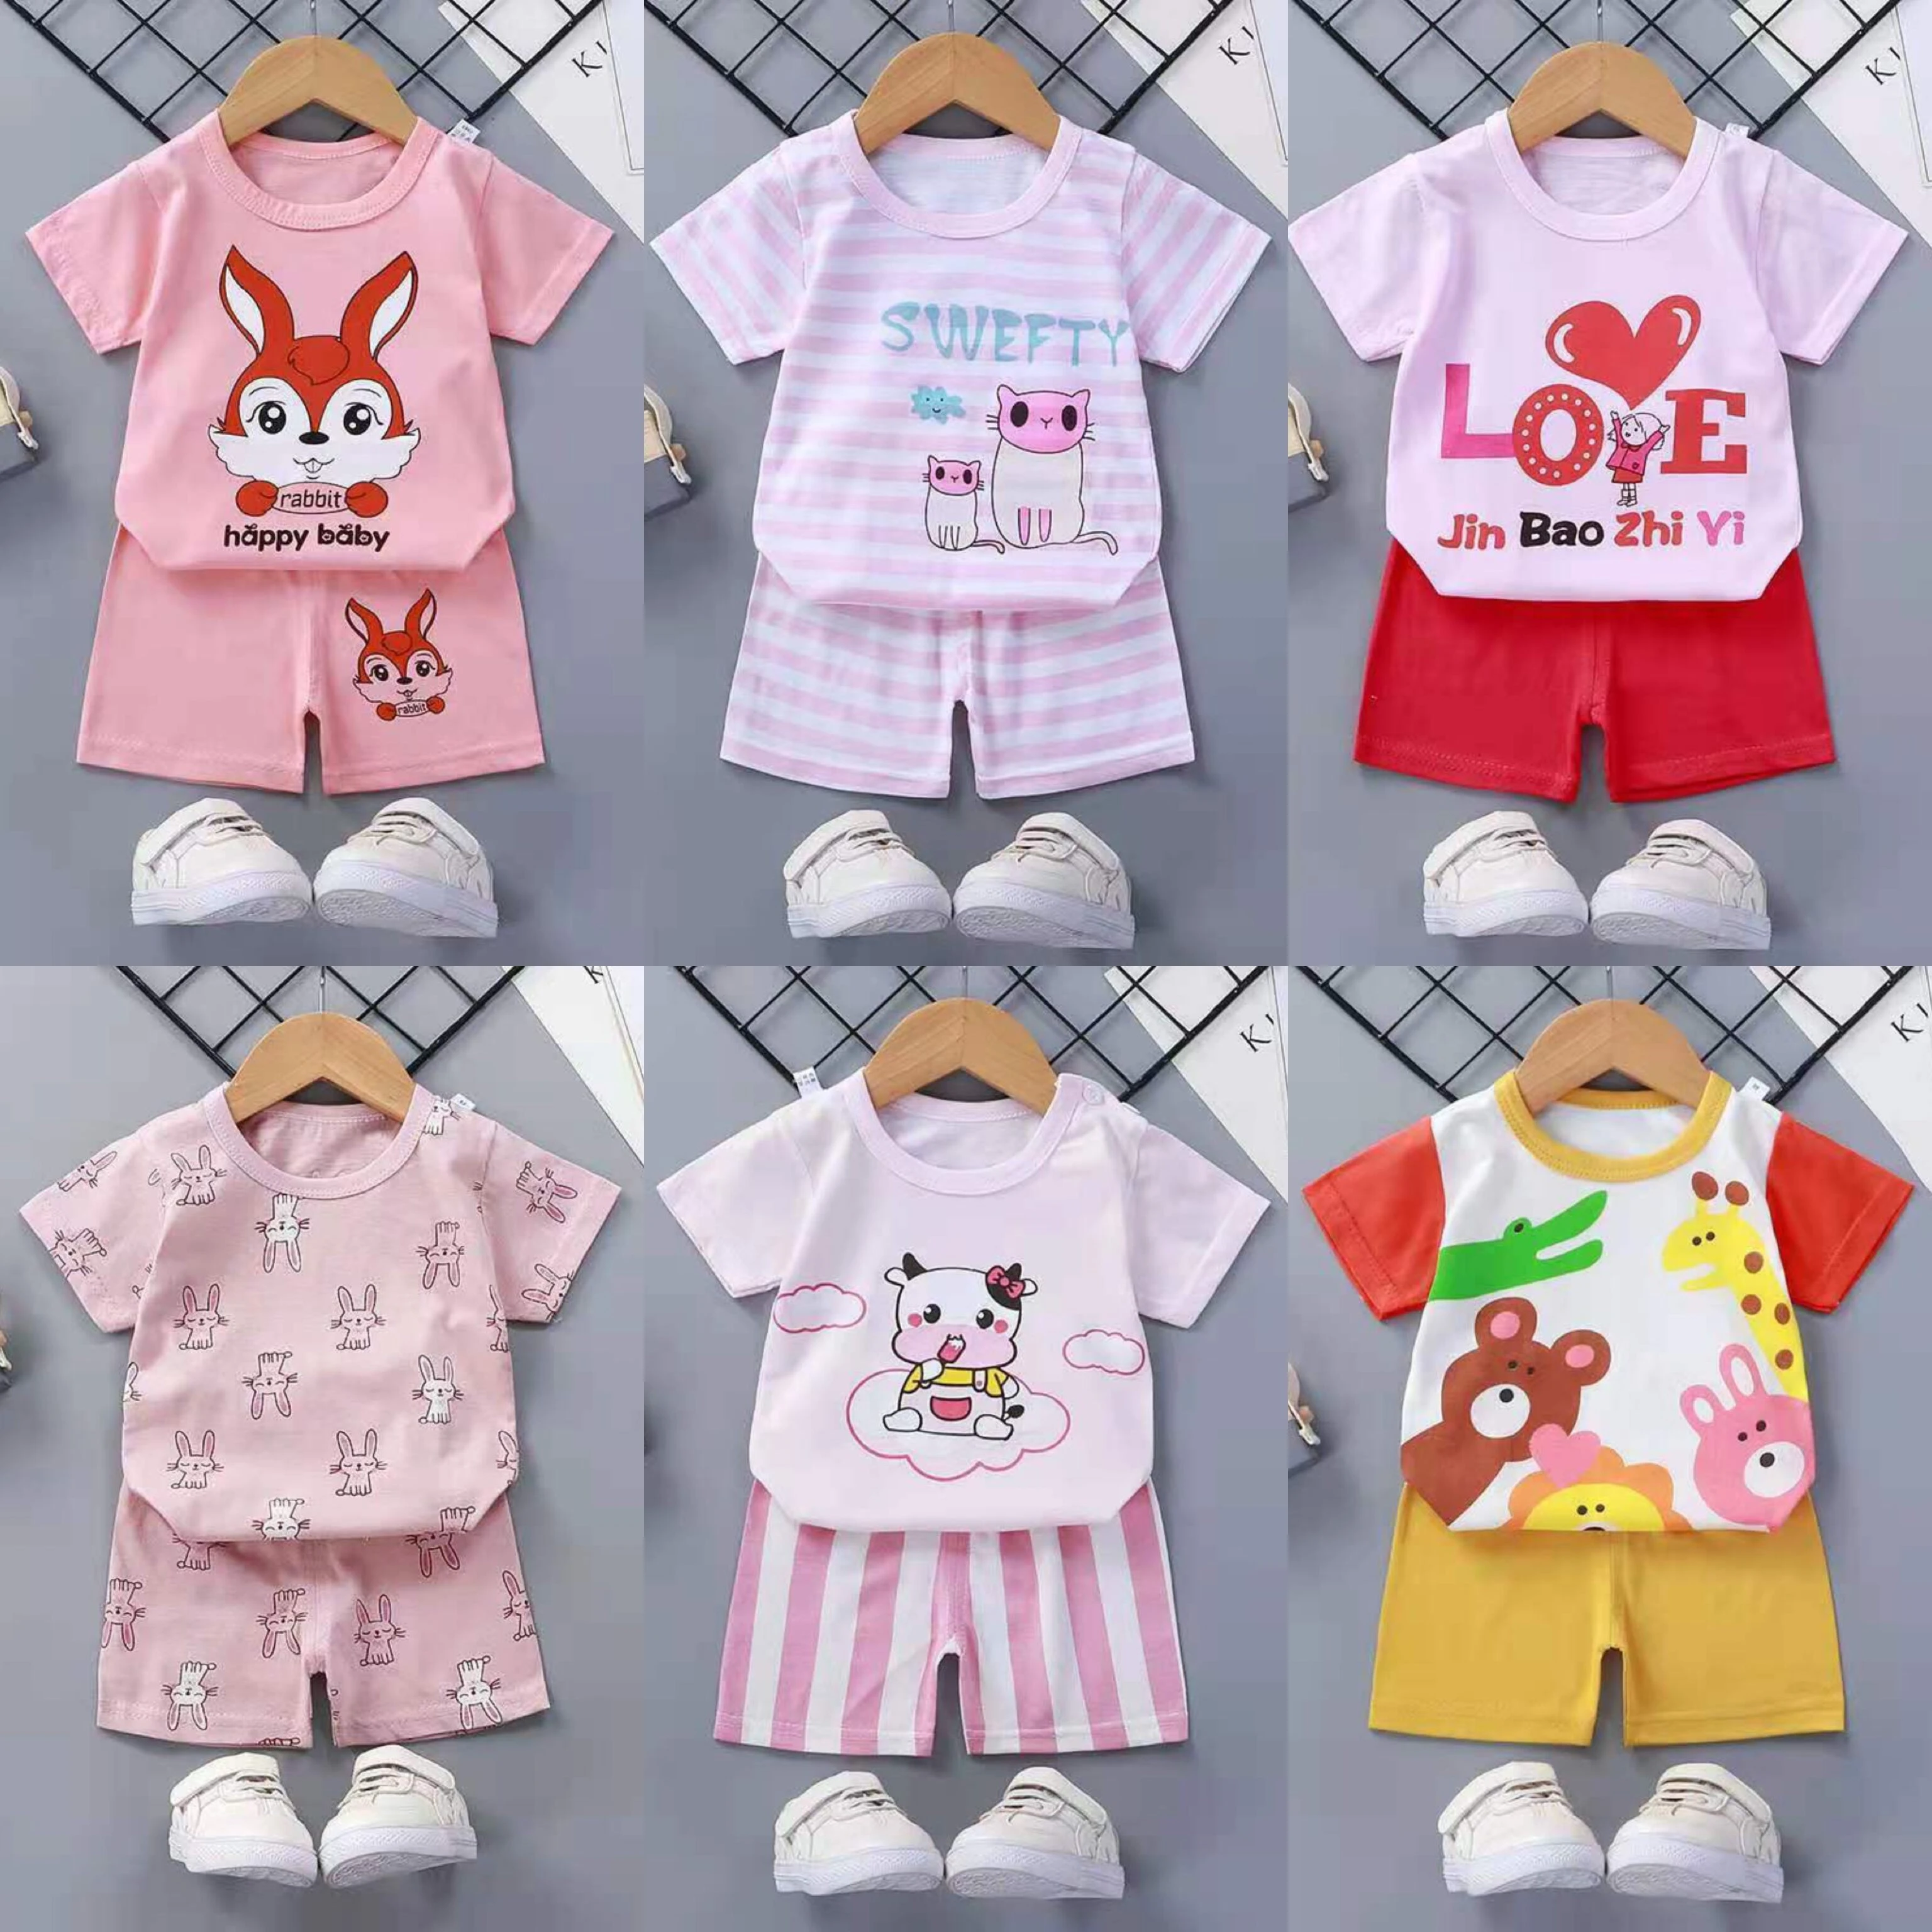 New 2pcs 6M-4T Cotton Clothing Sets Summer New Baby Boys Short Sleeve T-shirt+shorts Suit Toddler Girls Kids Outfit Clothes baby dress and set